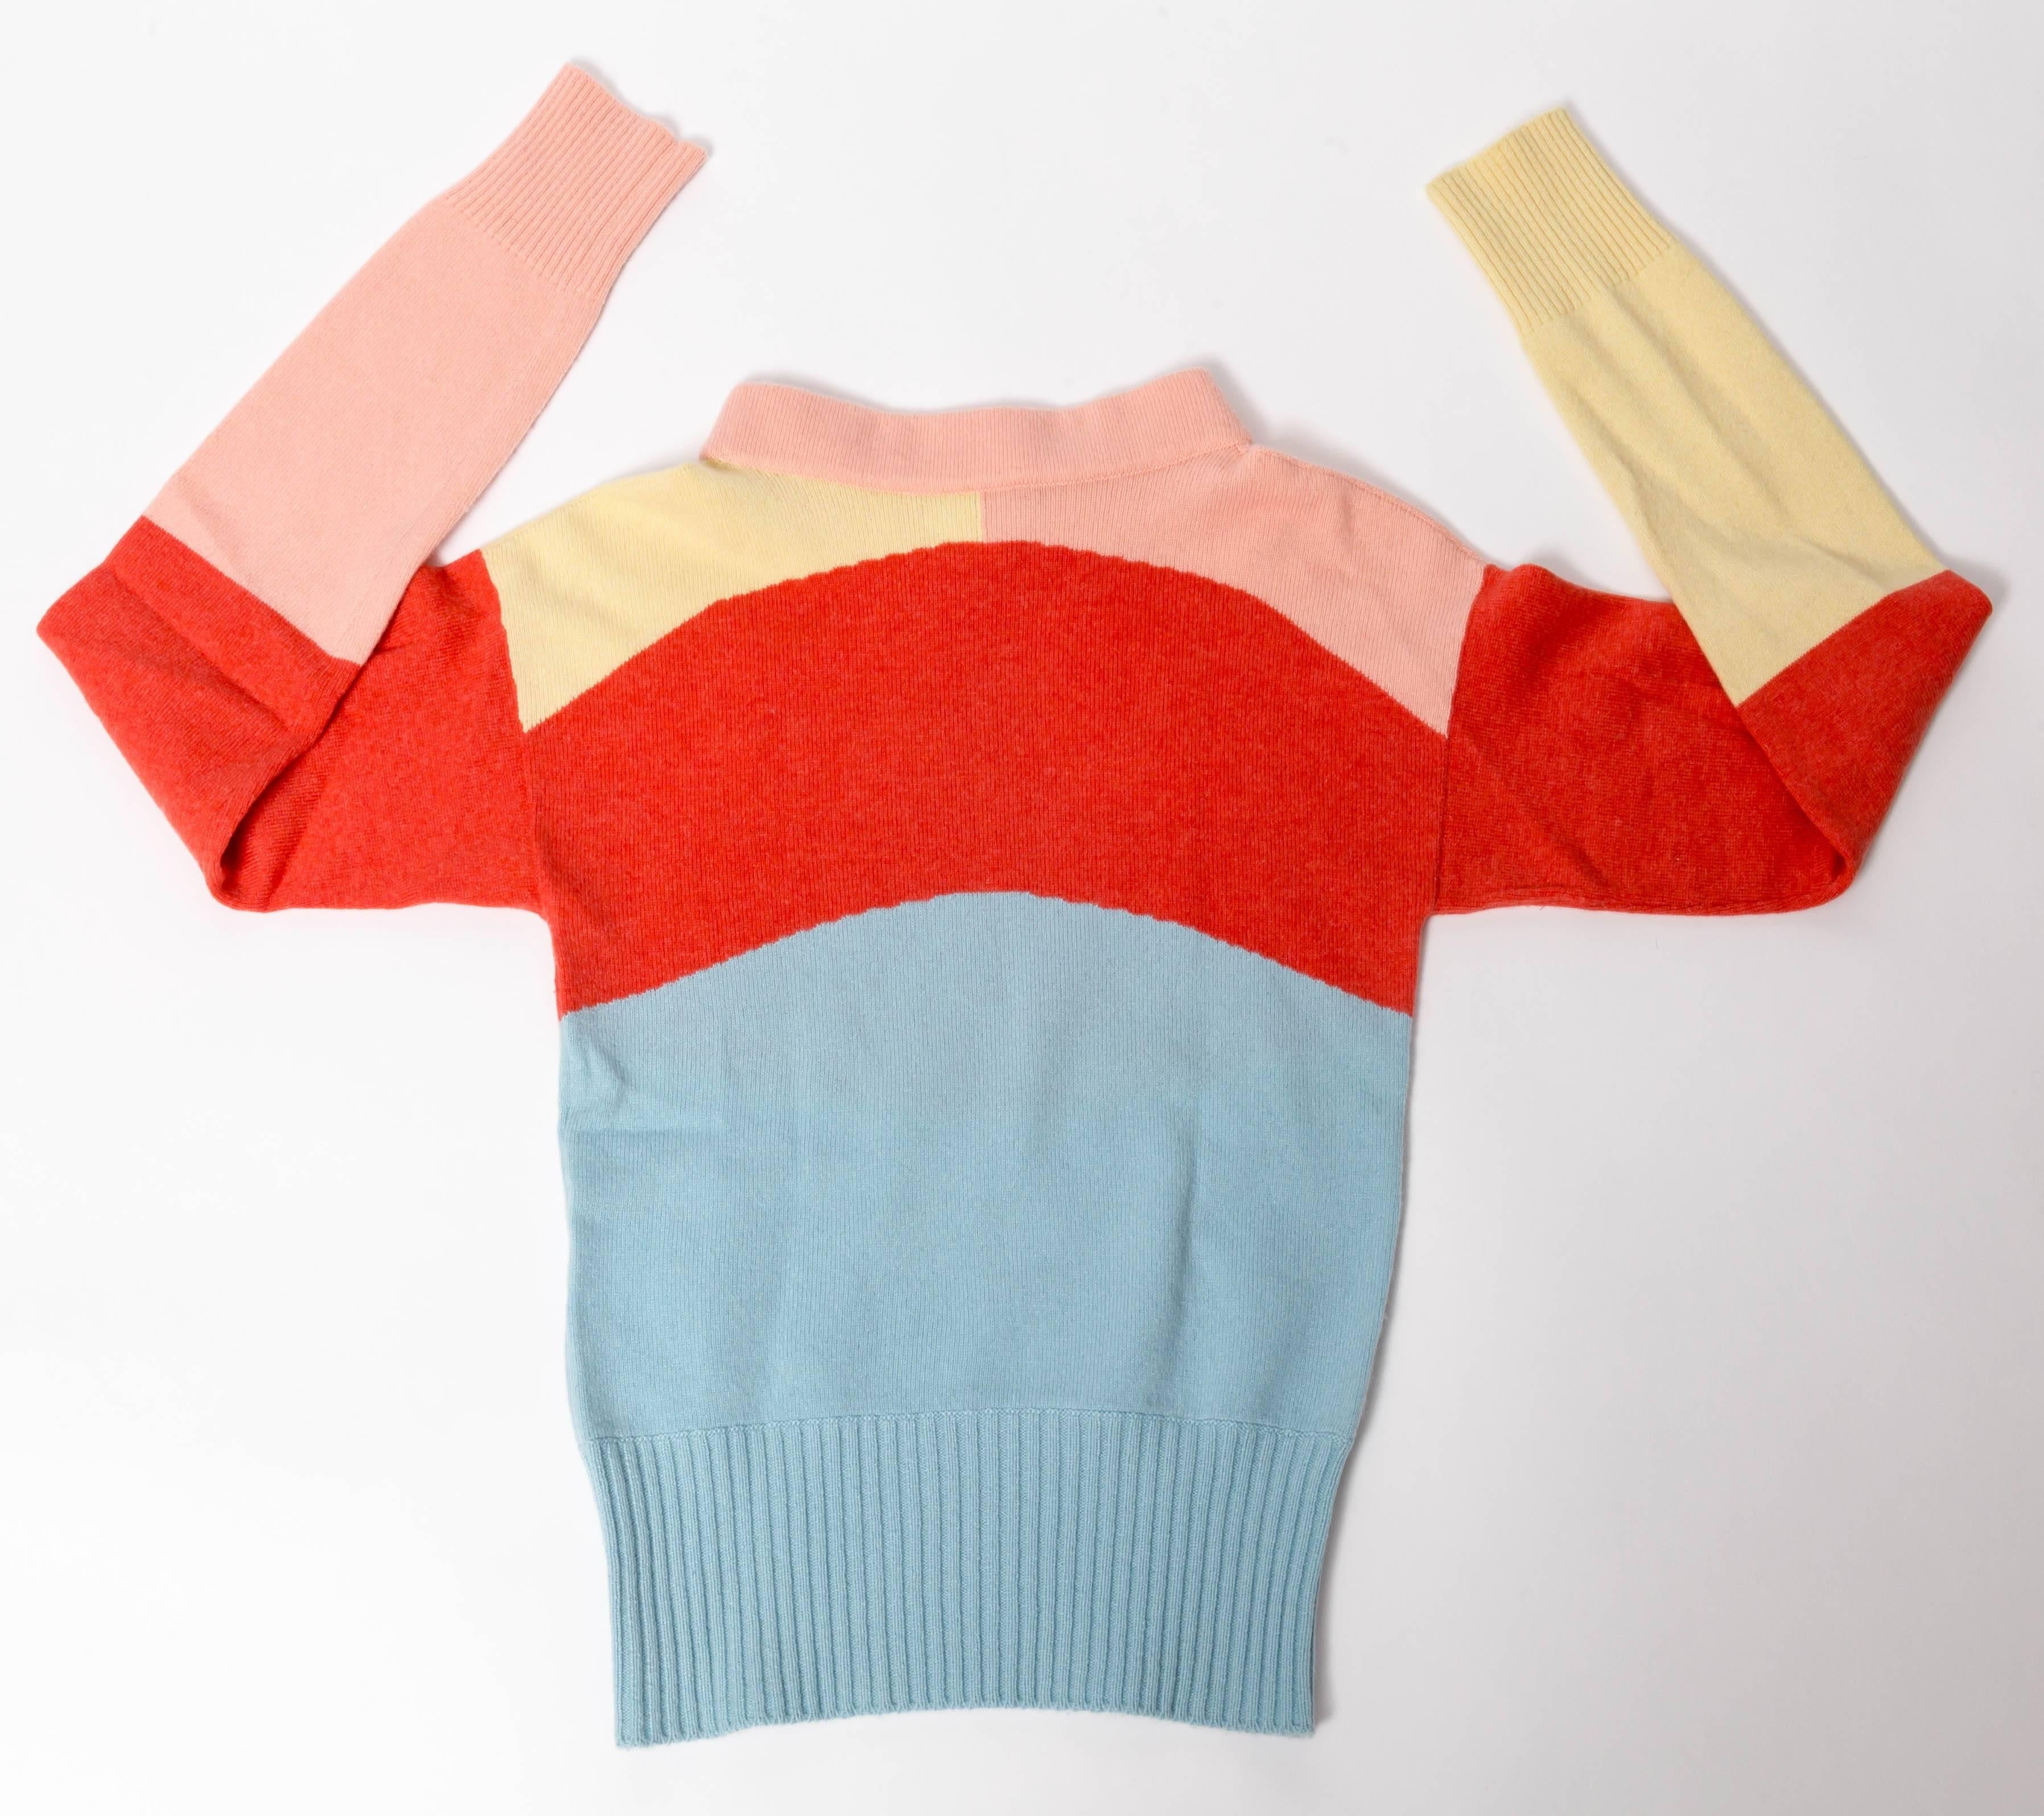 Chanel Cashmere Airplane Charm Color Block Sweater - 36 2